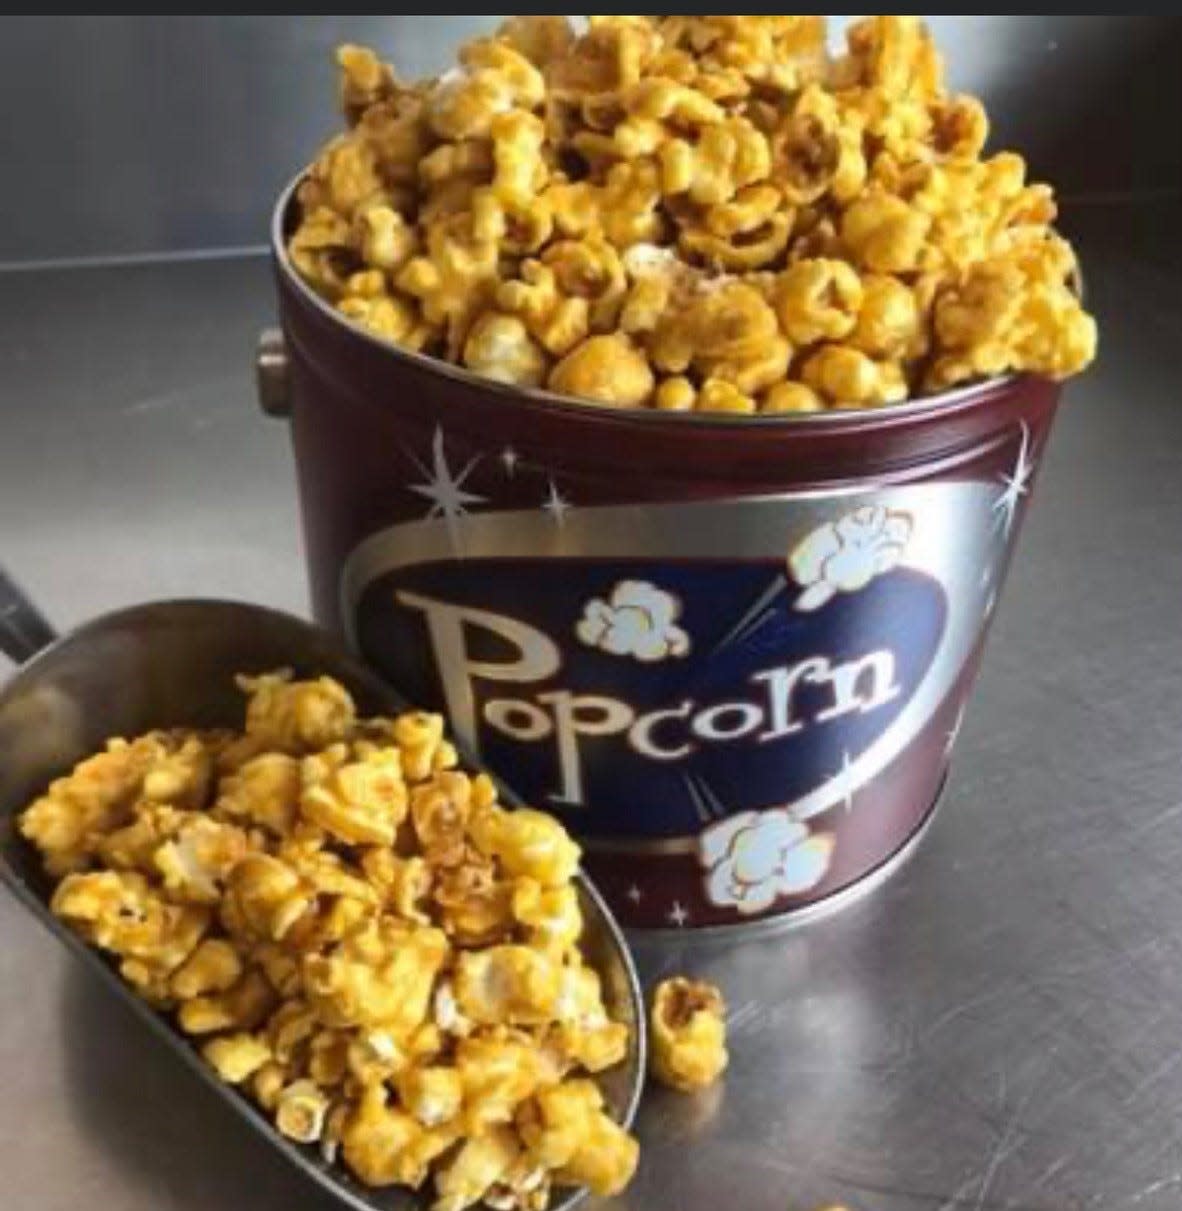 Caramel popcorn is among the best-selling flavors at Popcorn Paradise in Marine City. Tins filled with flavored popcorn are hot sellers this Christmas.